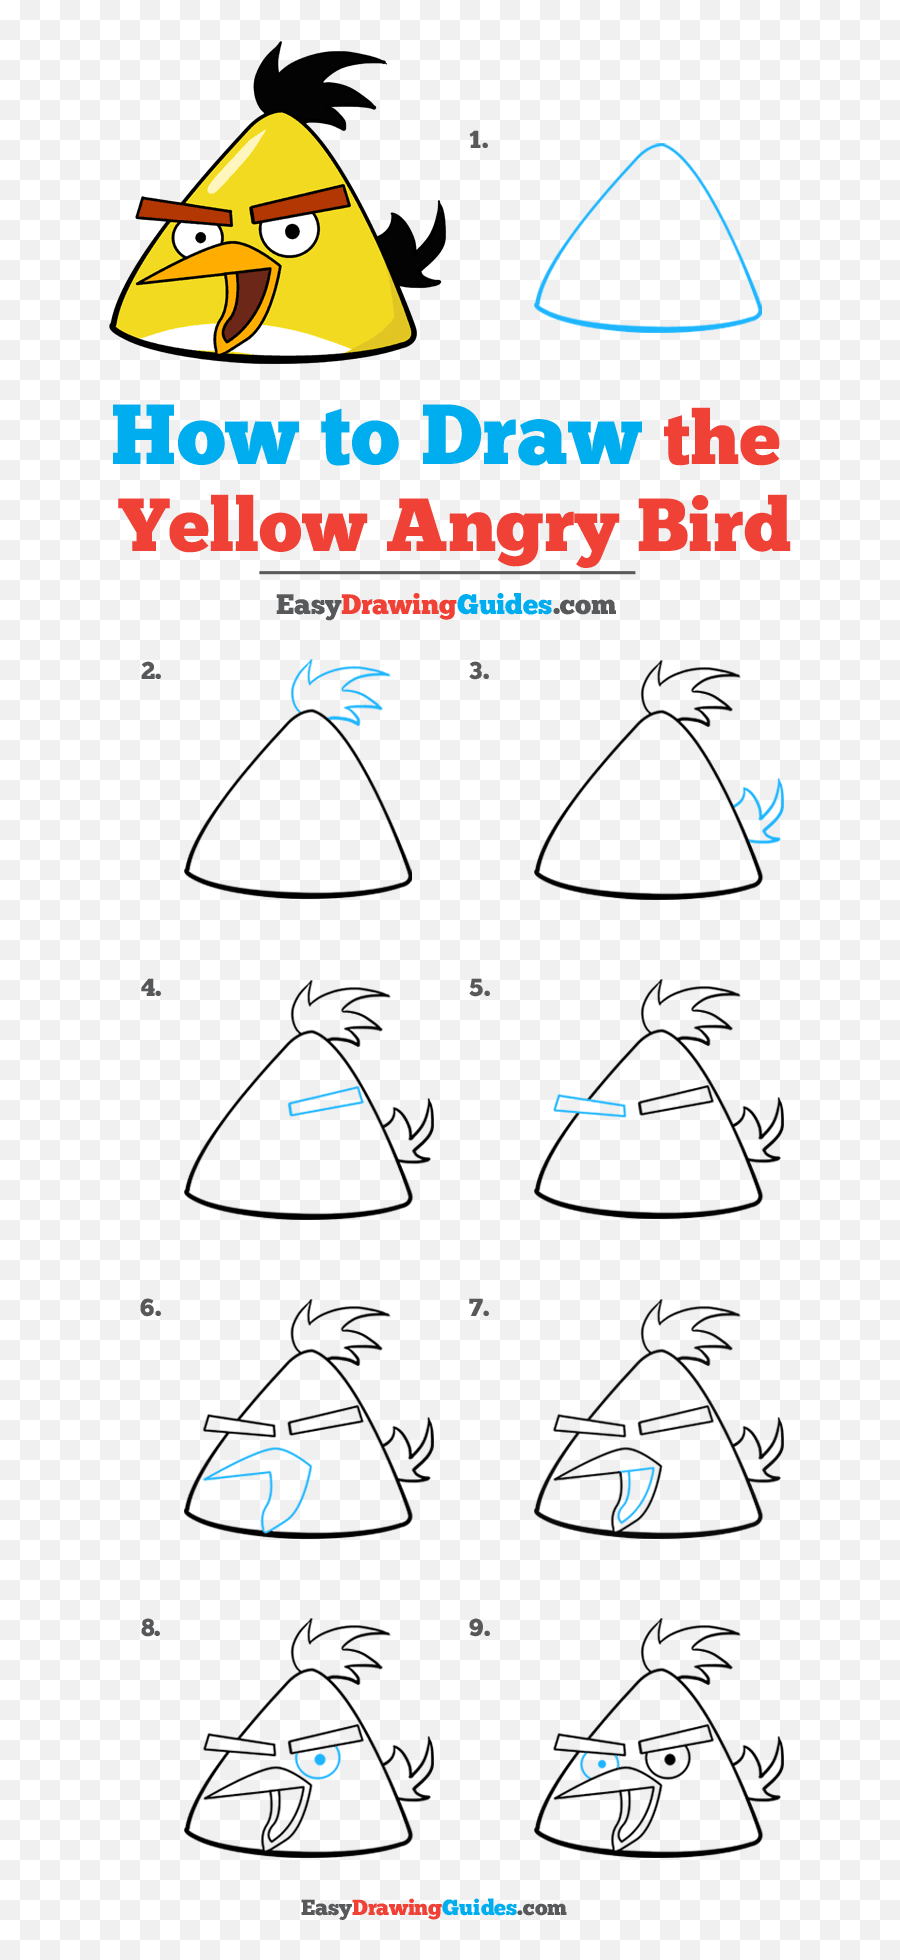 How To Draw The Yellow Angry Bird - Really Easy Drawing Tutorial Easy Teddy Bear Step By Step Emoji,Angry Birds Emojis